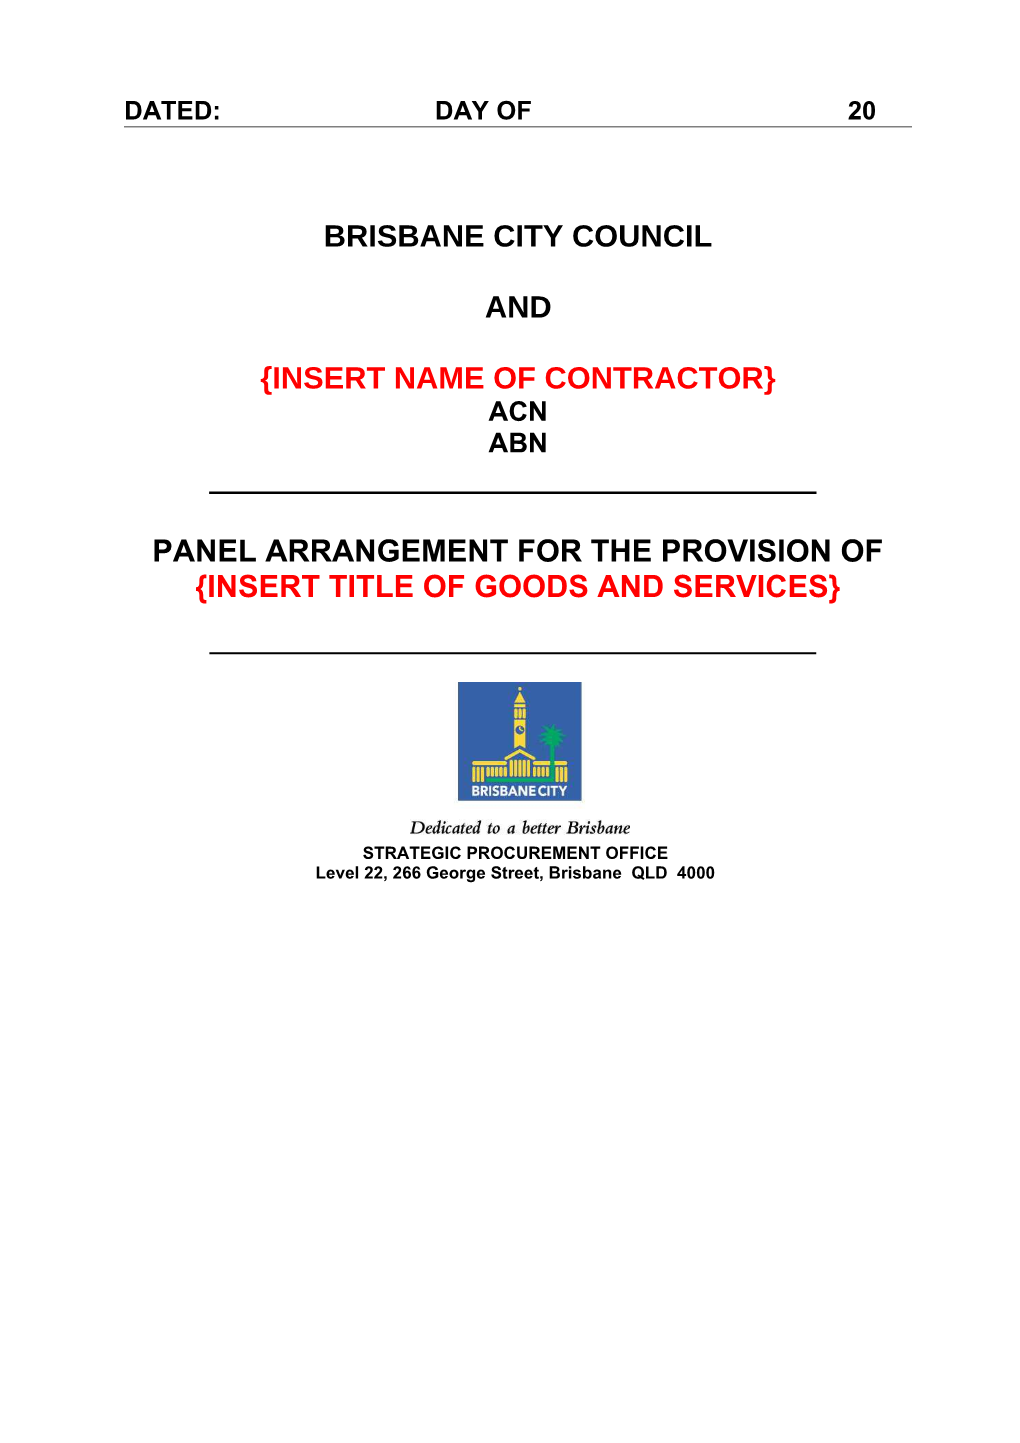 Panel Contract Between Brisbane City Council and Insert Name of Contractor